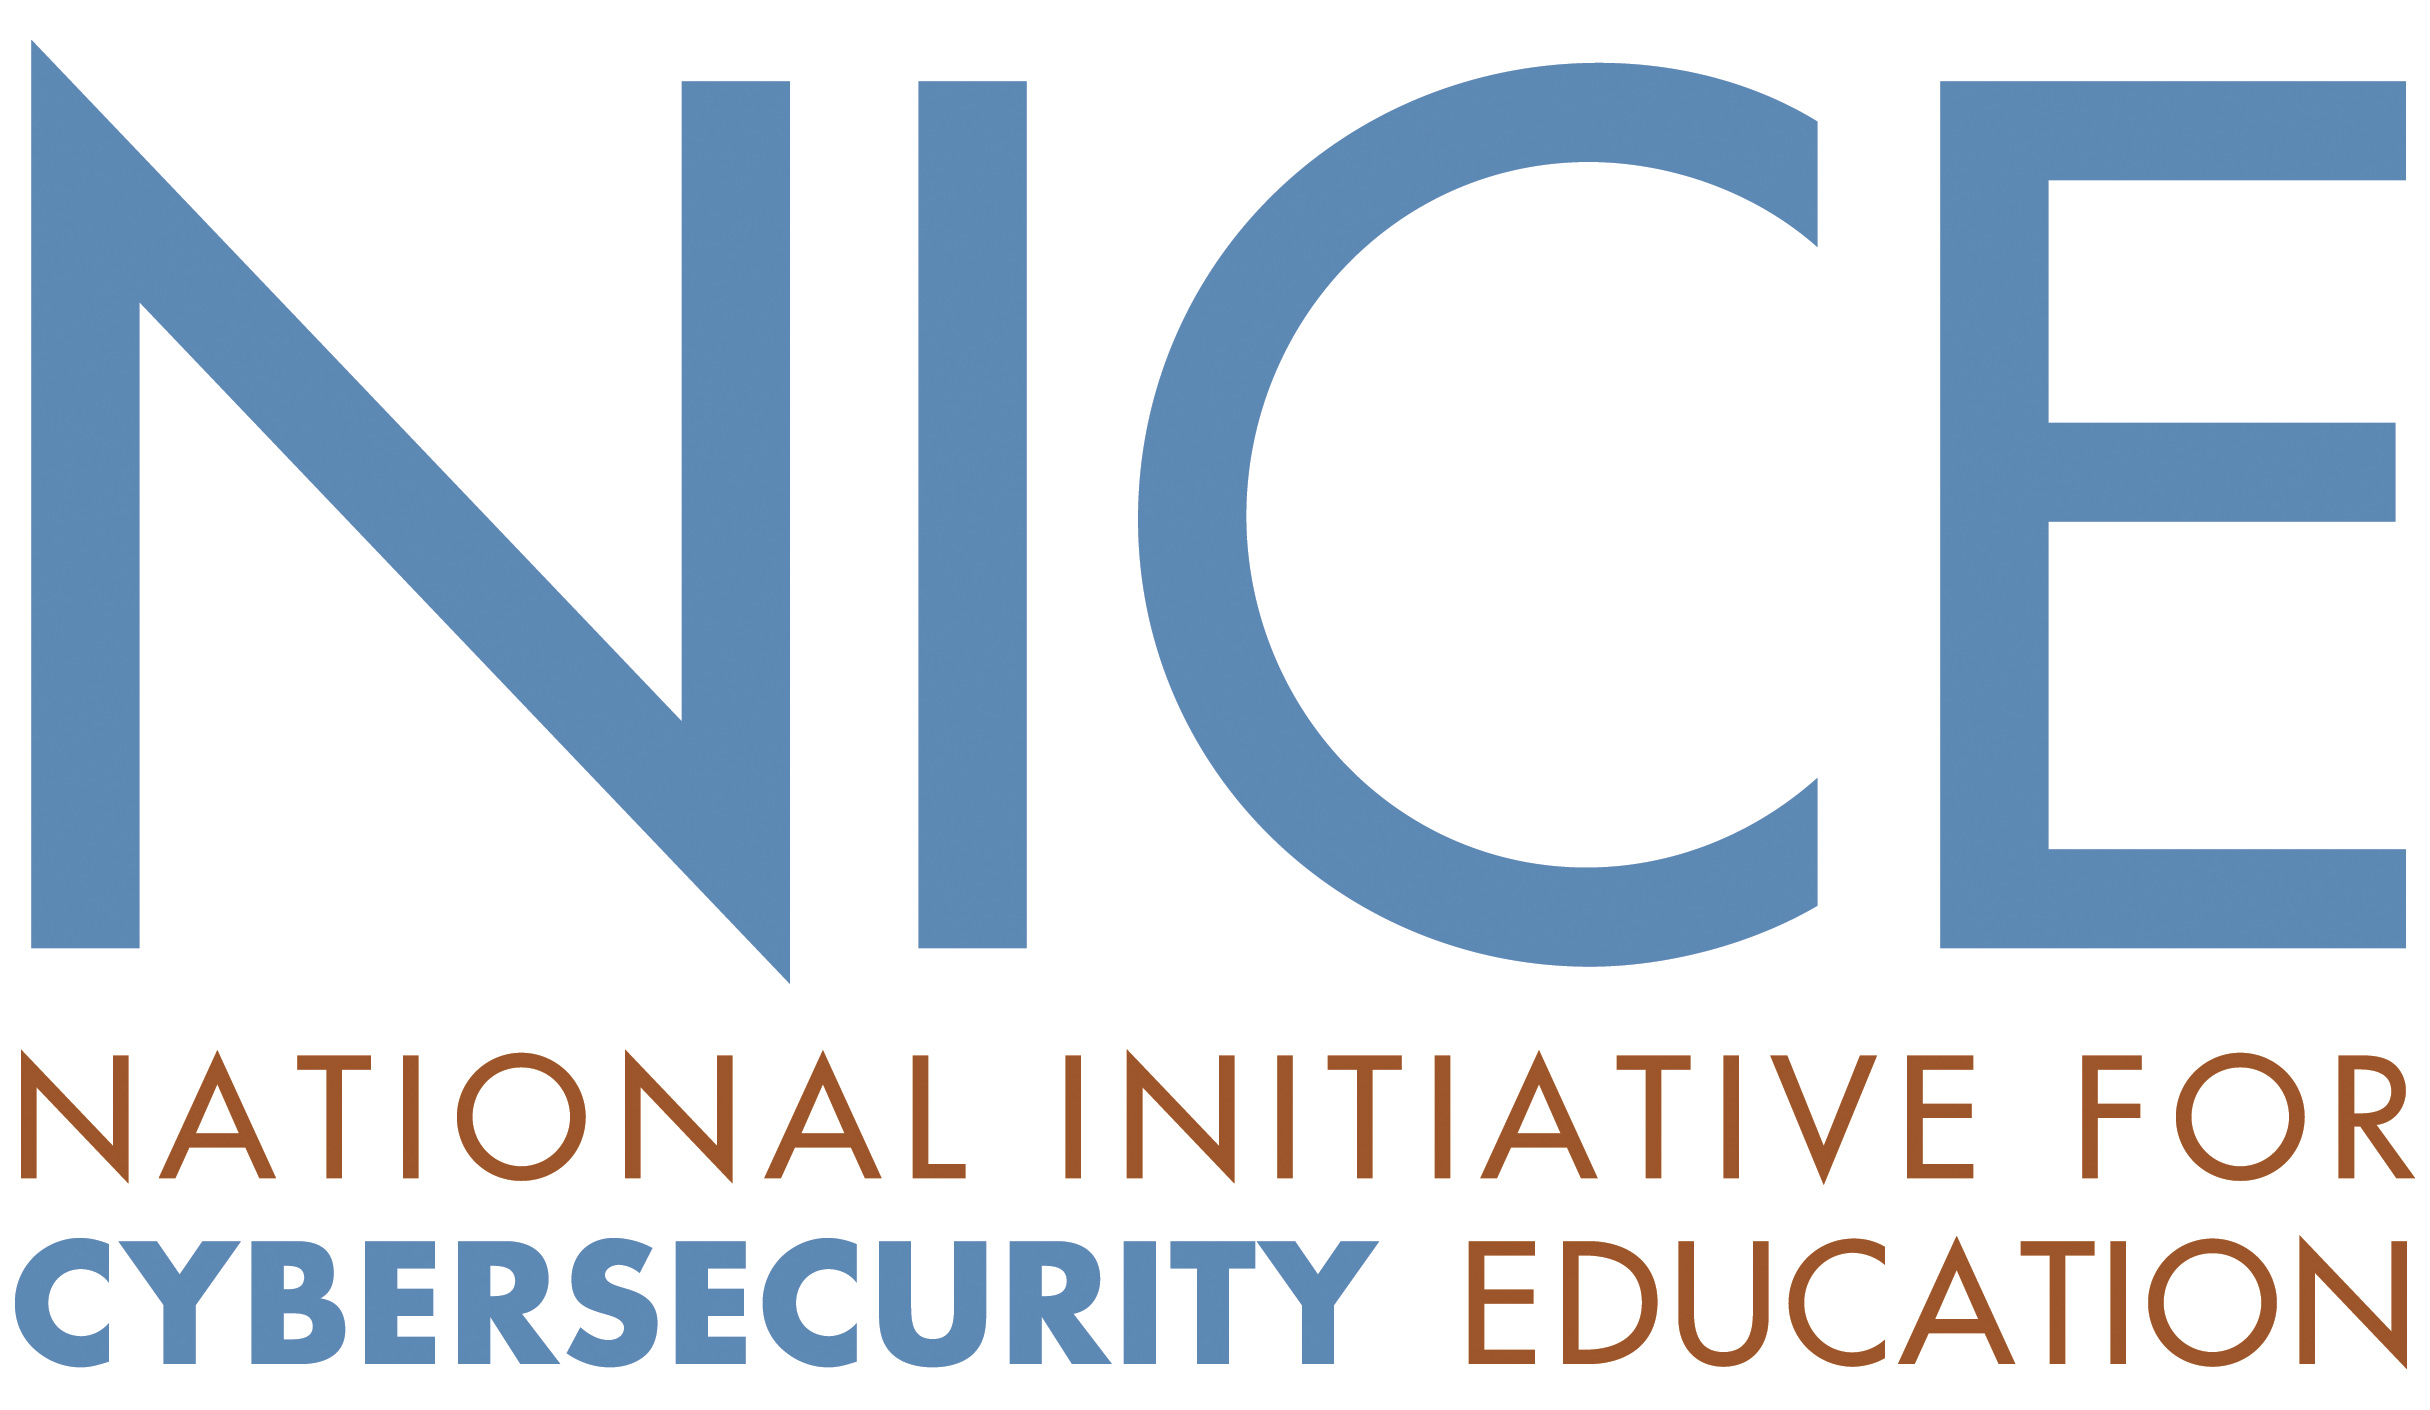 National Initiative for Cybersecurity Education Logo